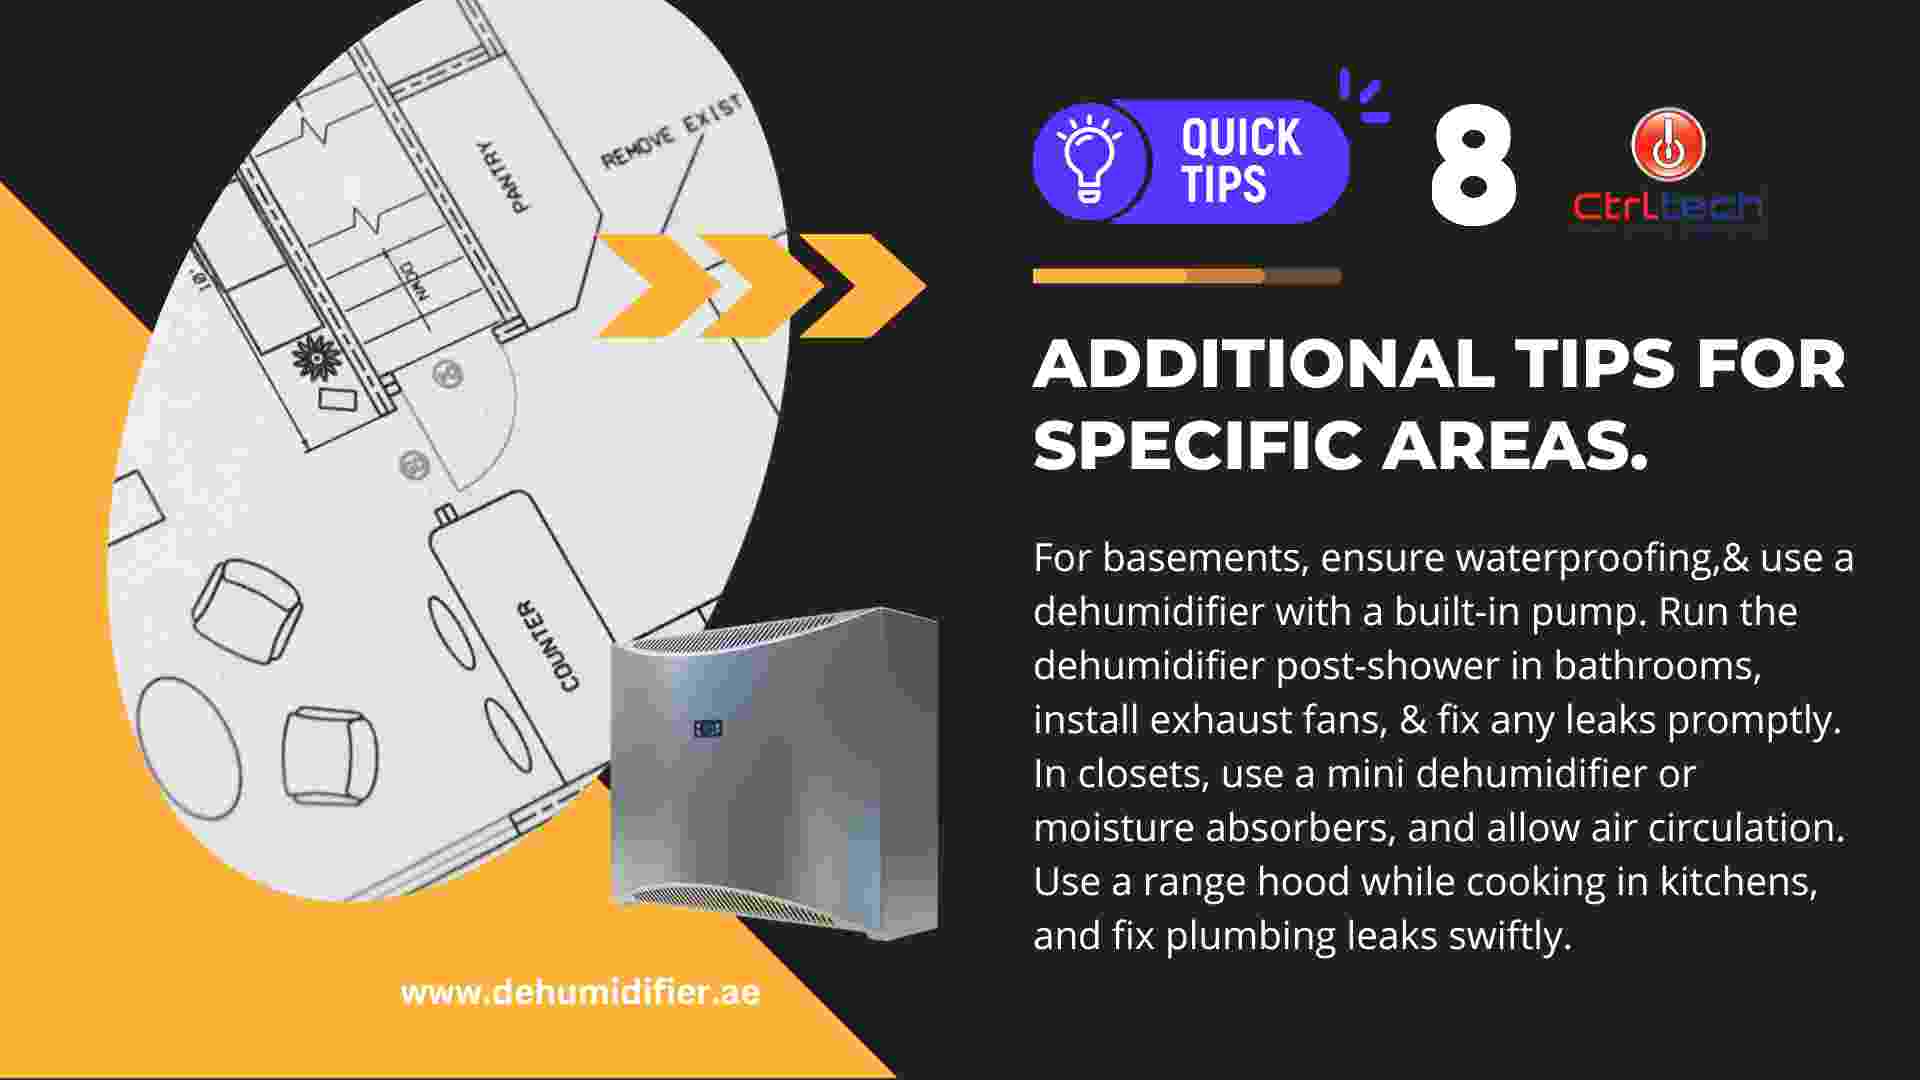 Tip 8 Additional tips for buying dehumidifier for specific areas